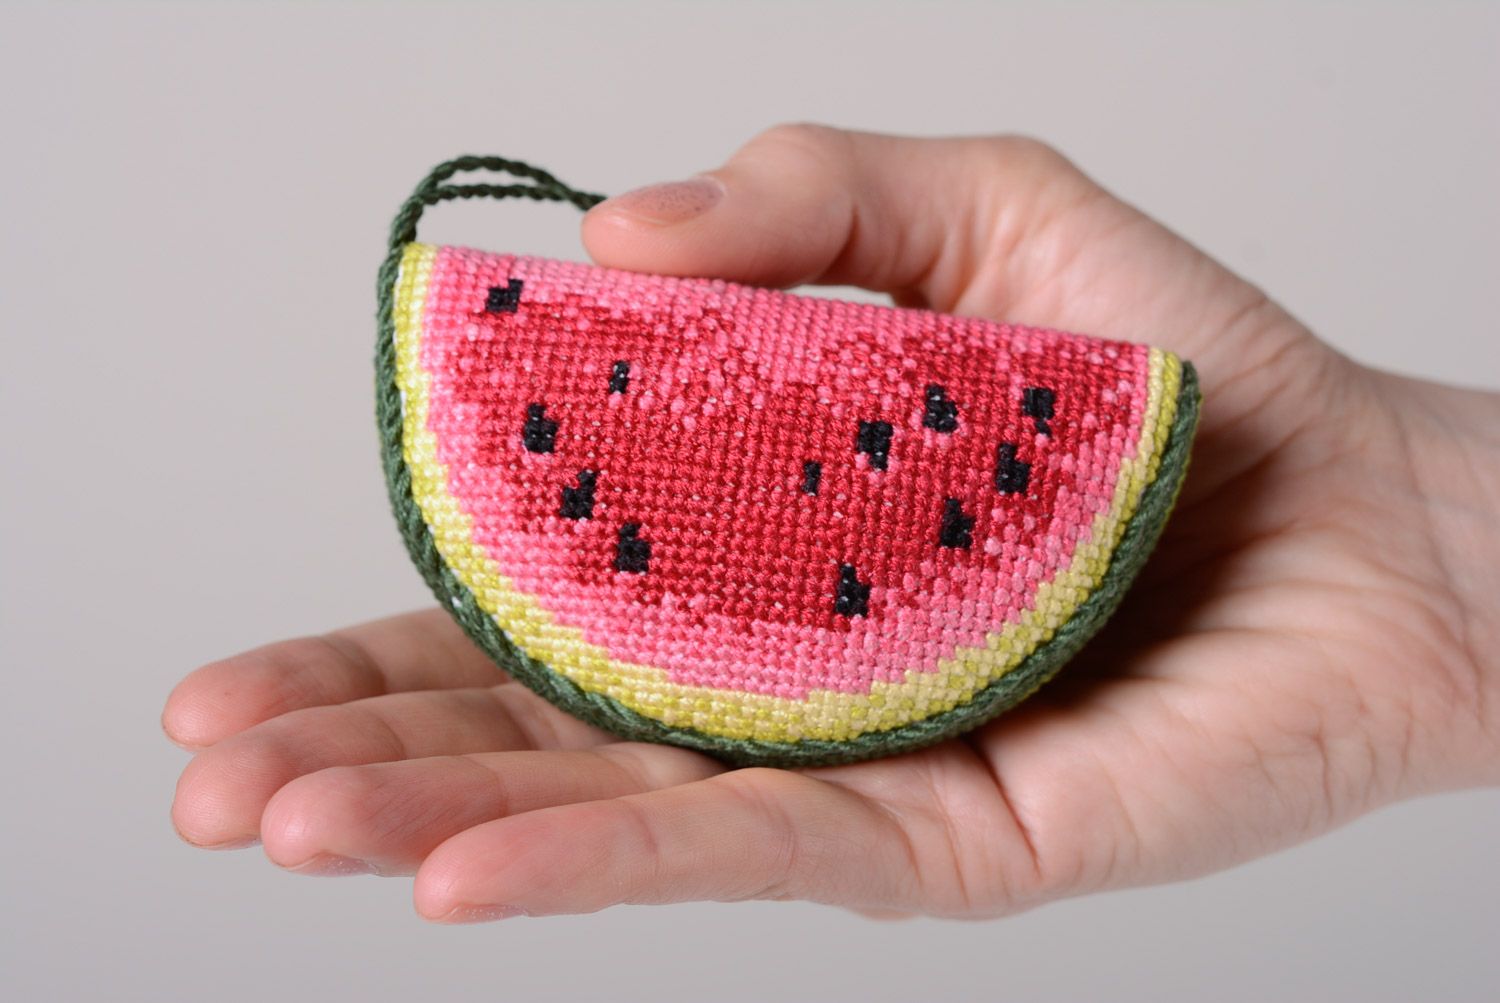 Handmade cross stitched soft pincushion in the shape of water-melon slice  photo 4